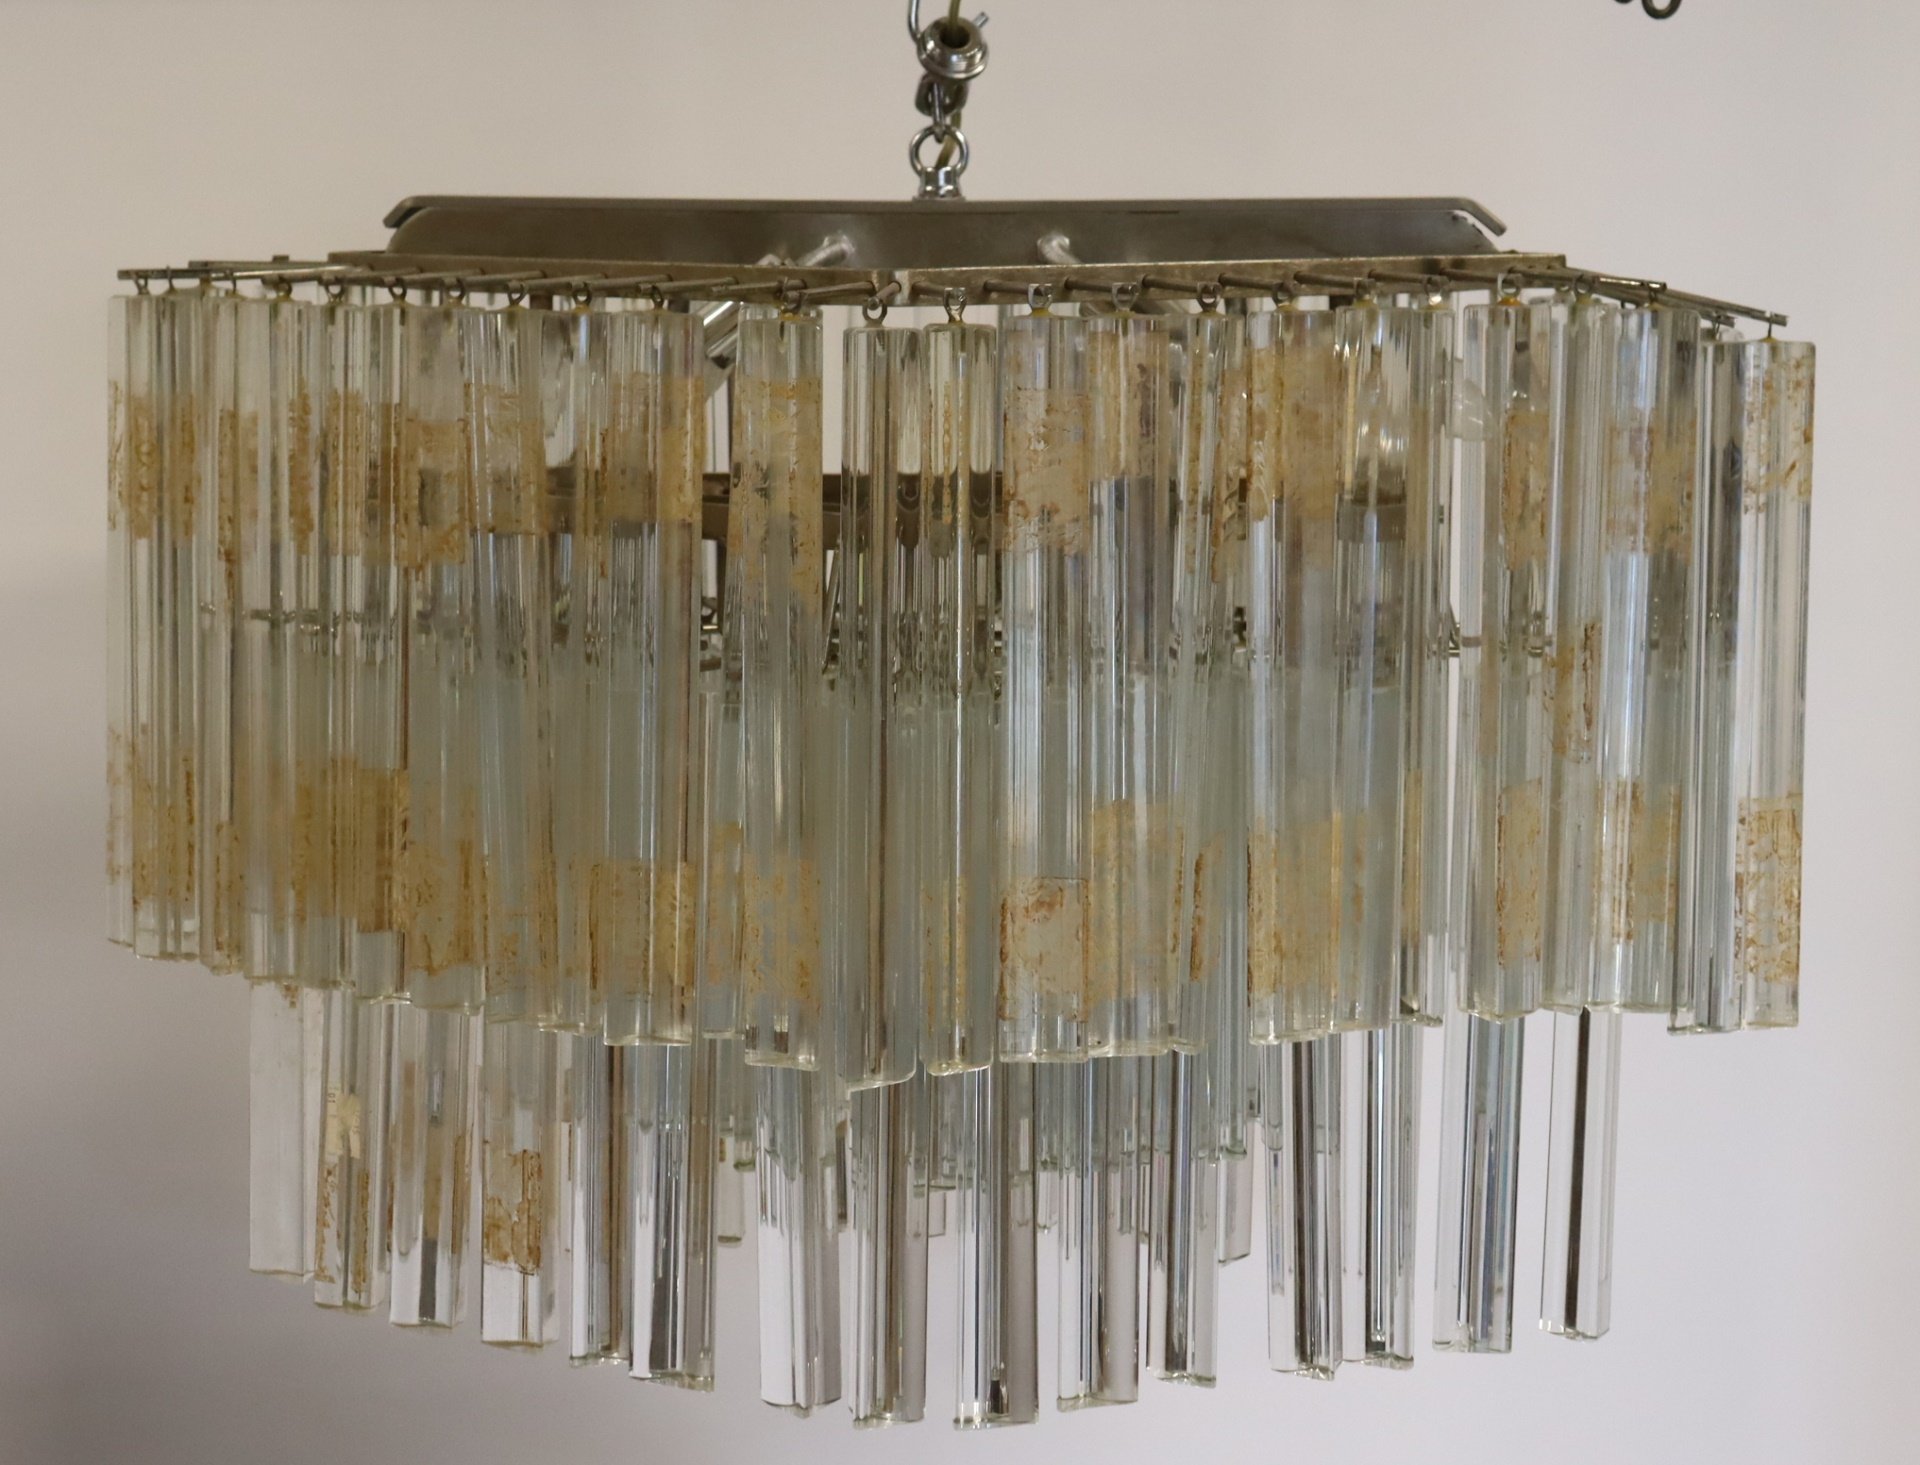 MIDCENTURY CAMER CHANDELIER From 30b811